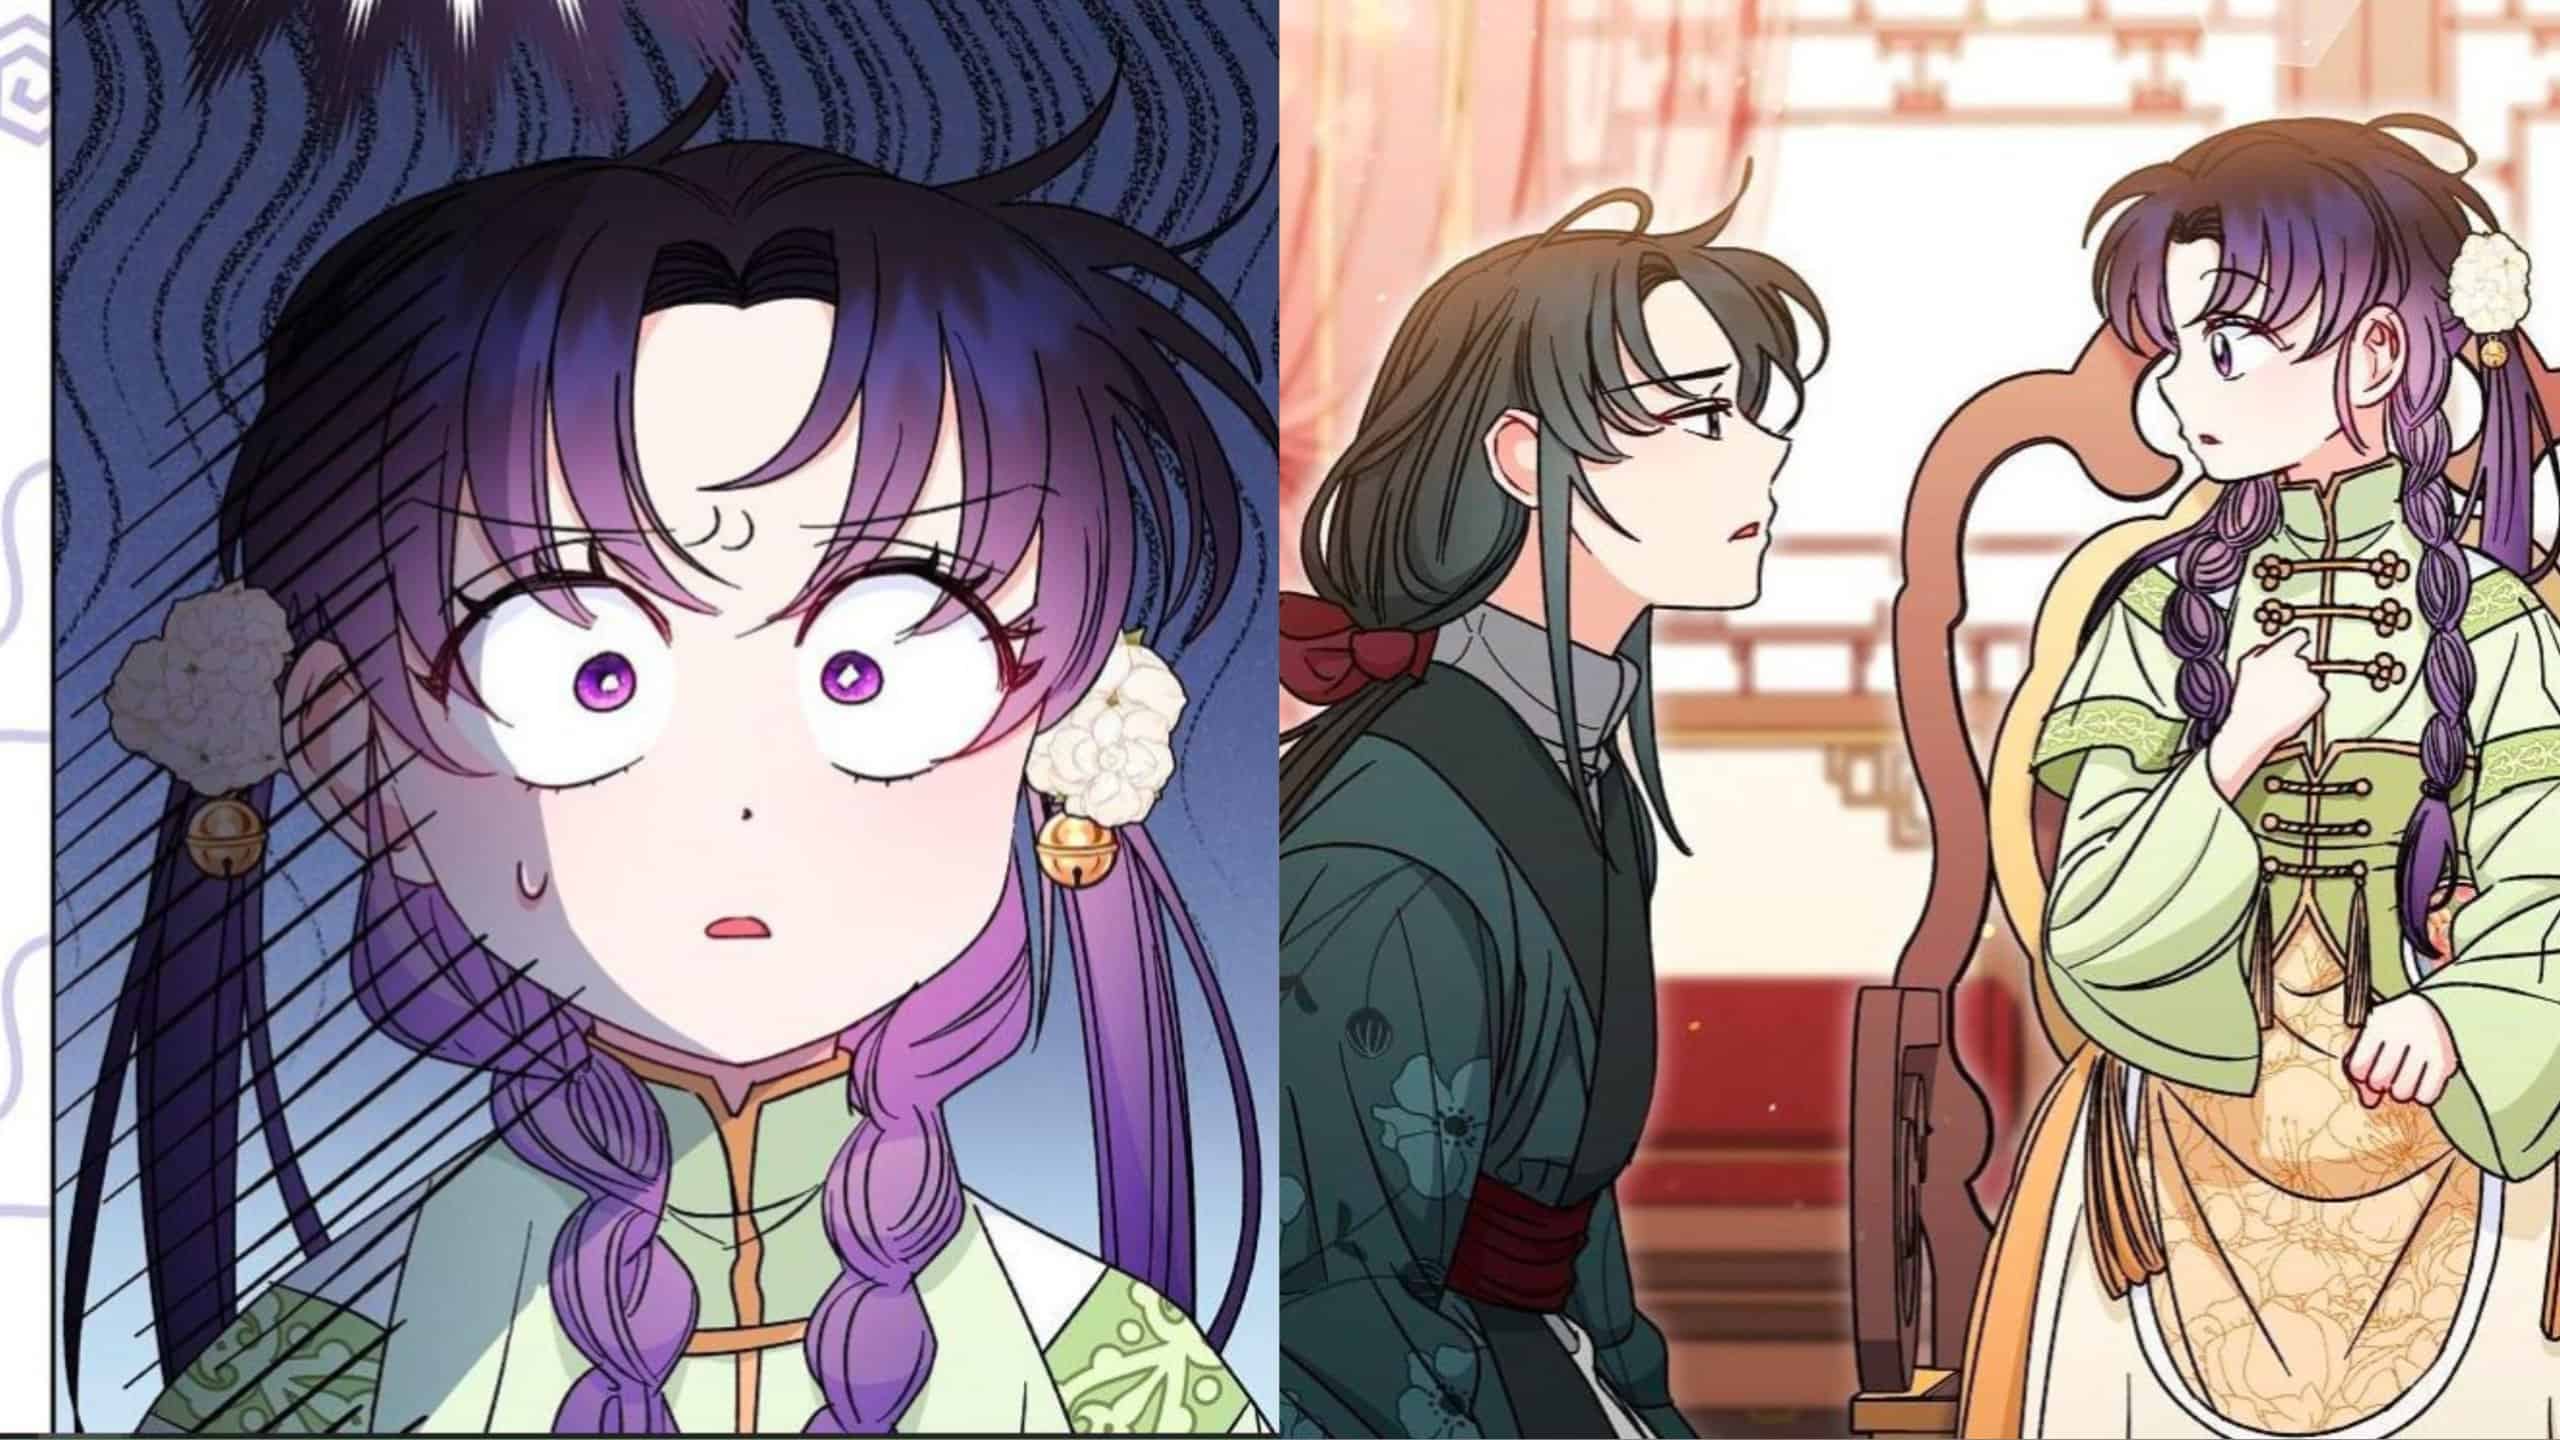 The Baby Concubine Wants to Live Quietly - Stills from Chapter 29